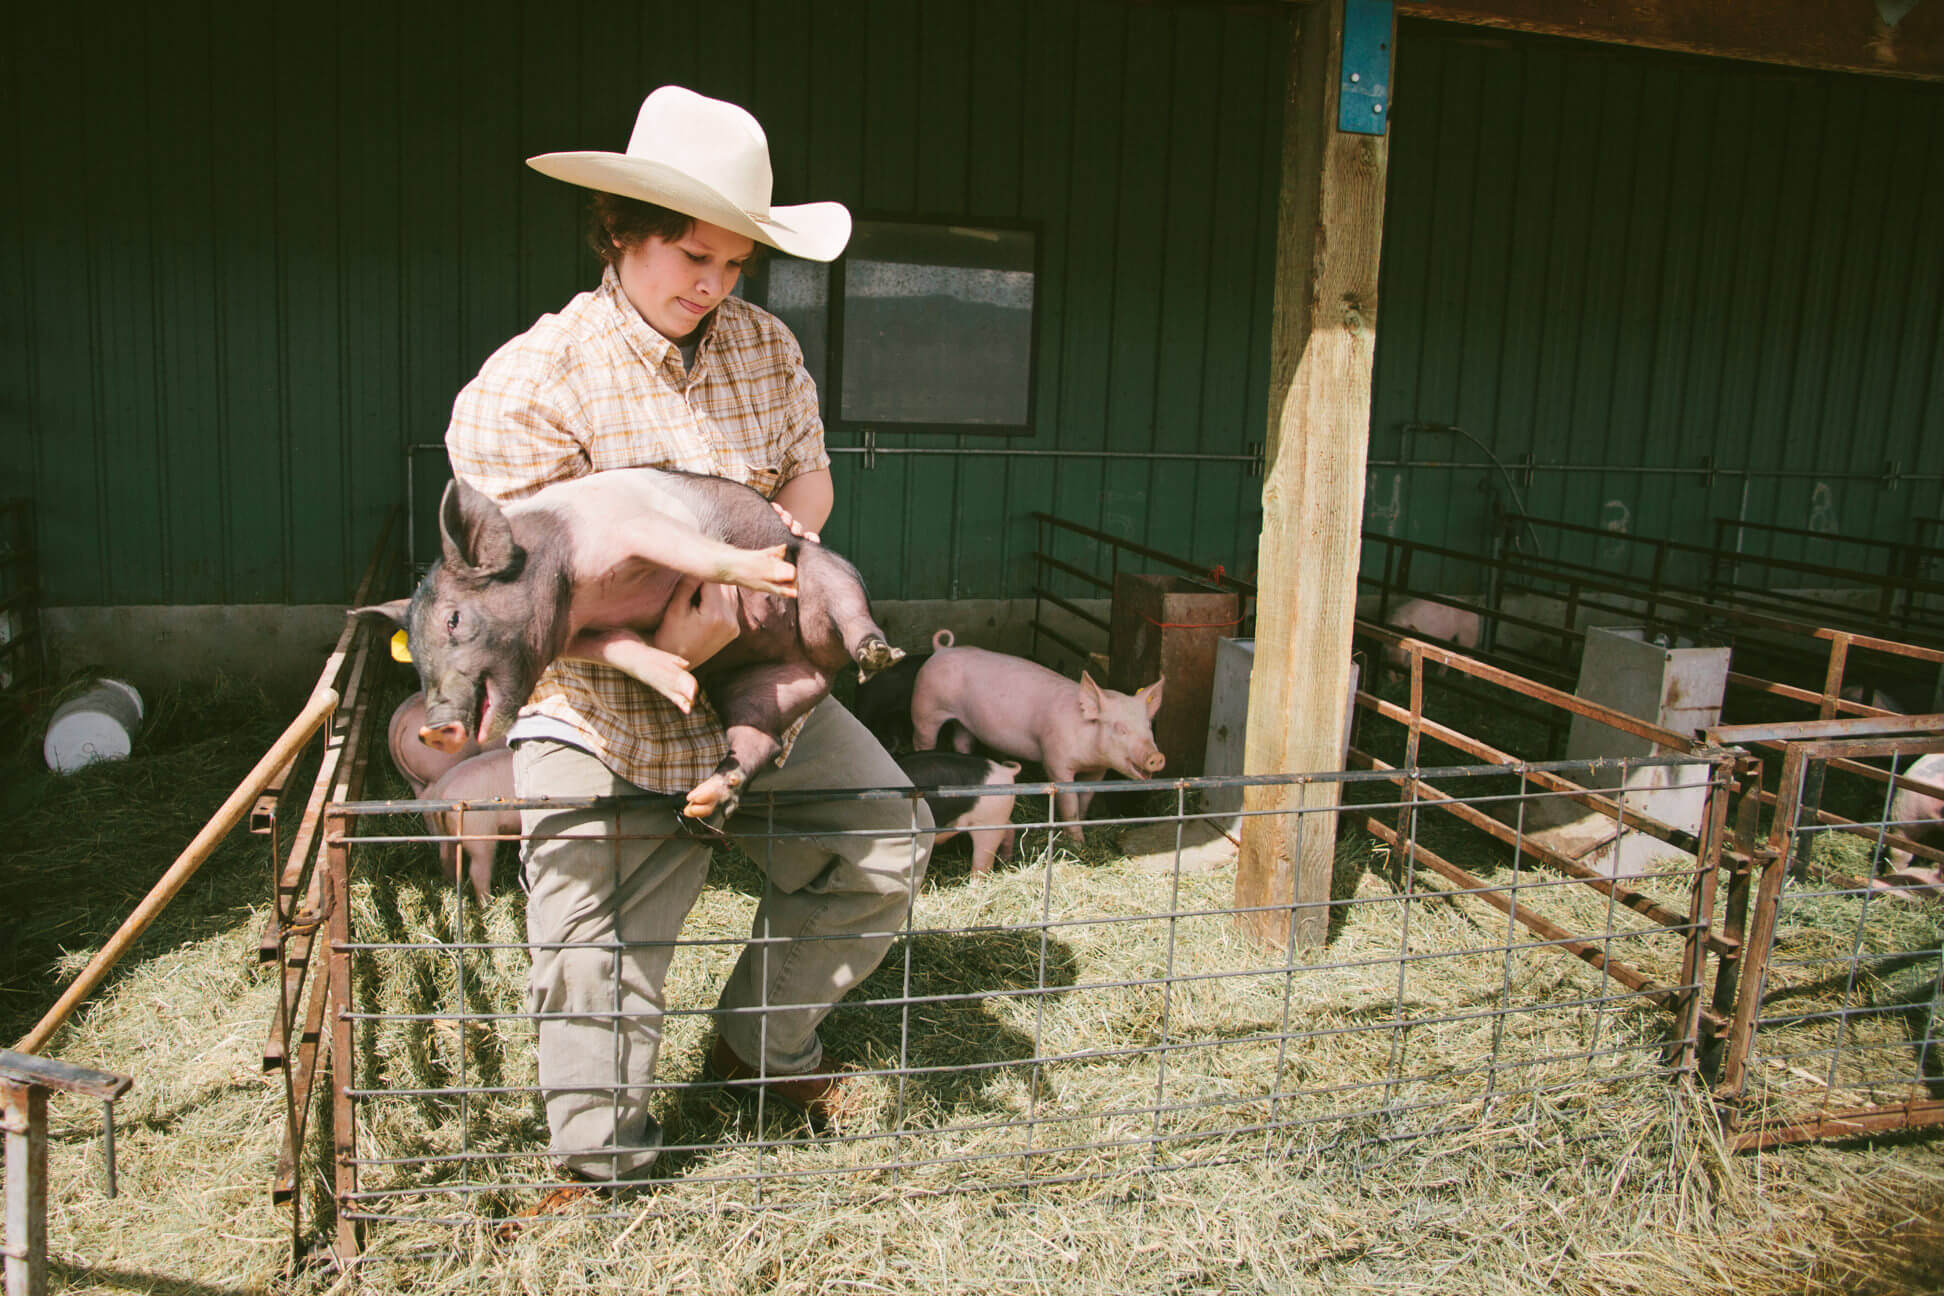 A young man removes a piglet from its pen in Missoula Montana